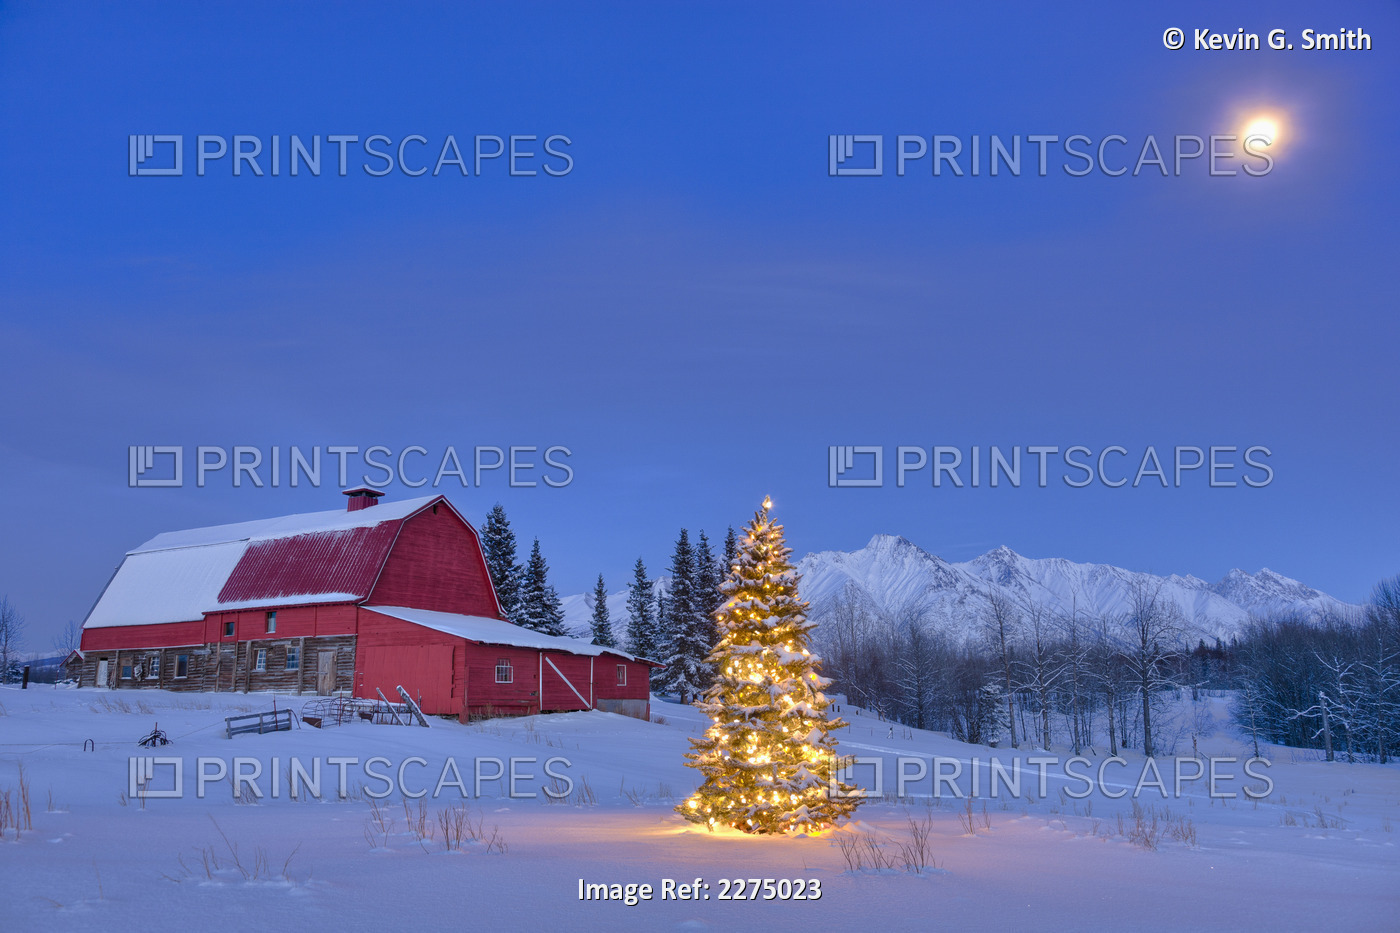 Lit Christmas Tree In A Snow Covered Field Standing In Front Of A Vintage Red ...